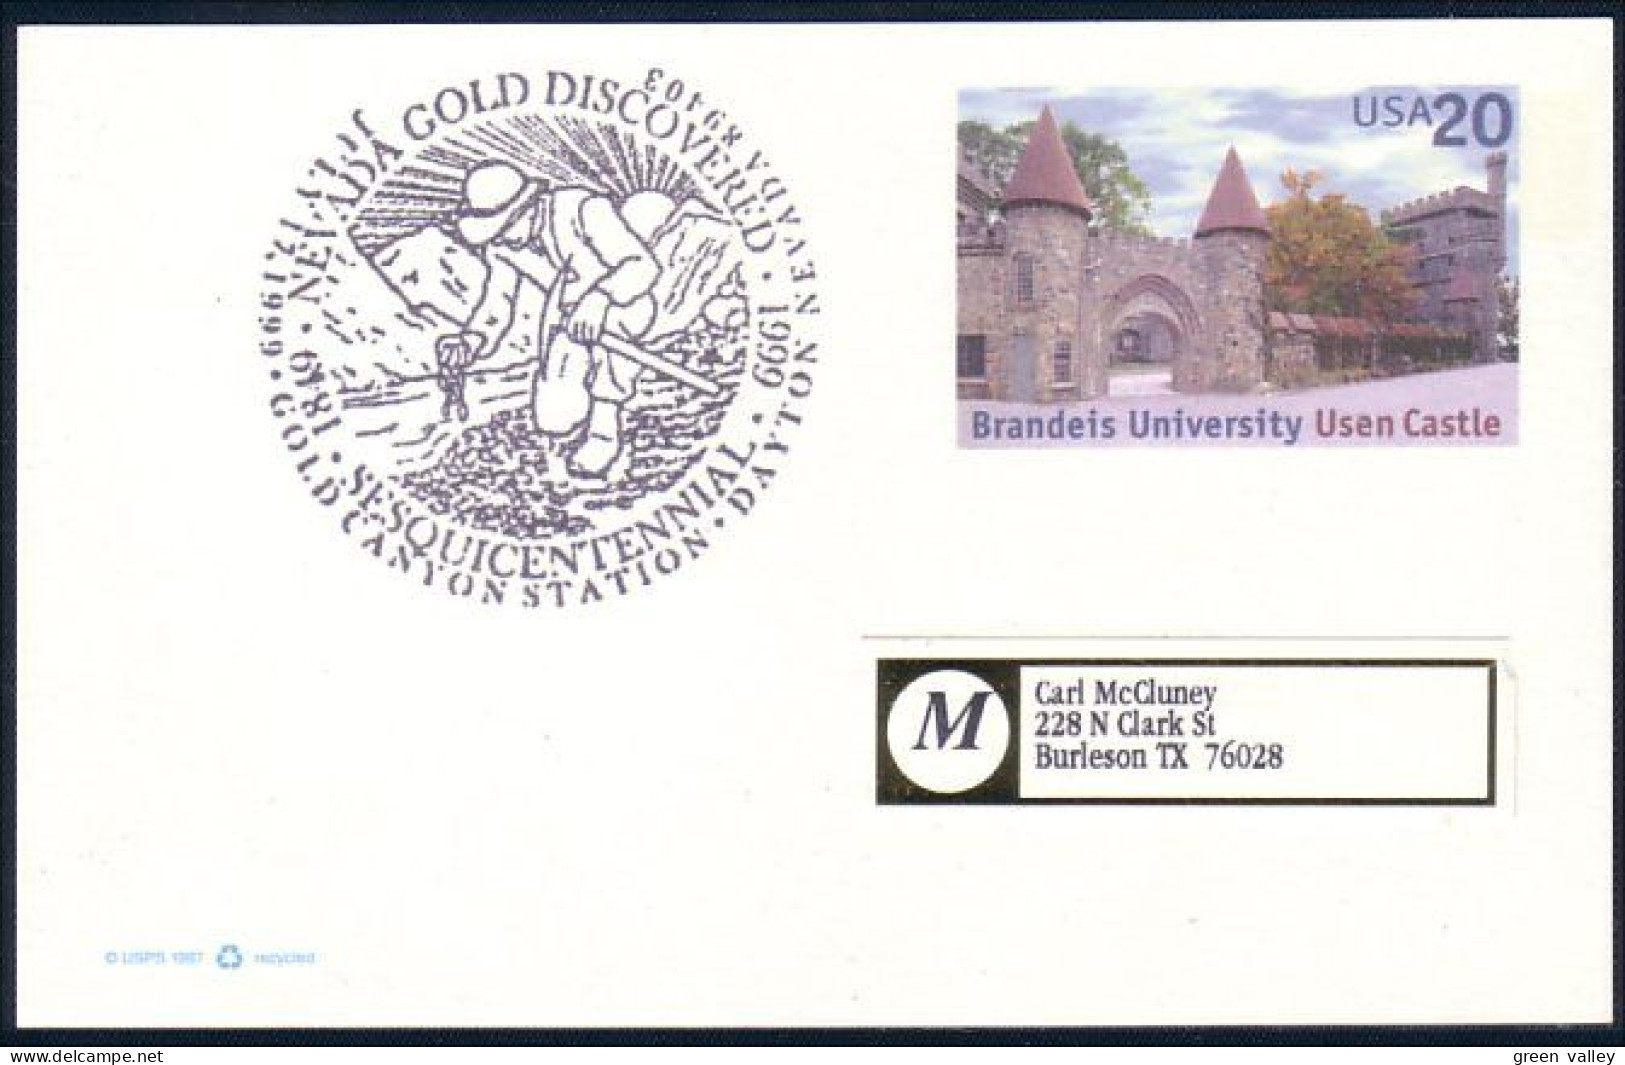 US Postcard Nevada Gold Discovery 150th Dayton, NV JULY 12, 1999 ( A91 730) - Minerals